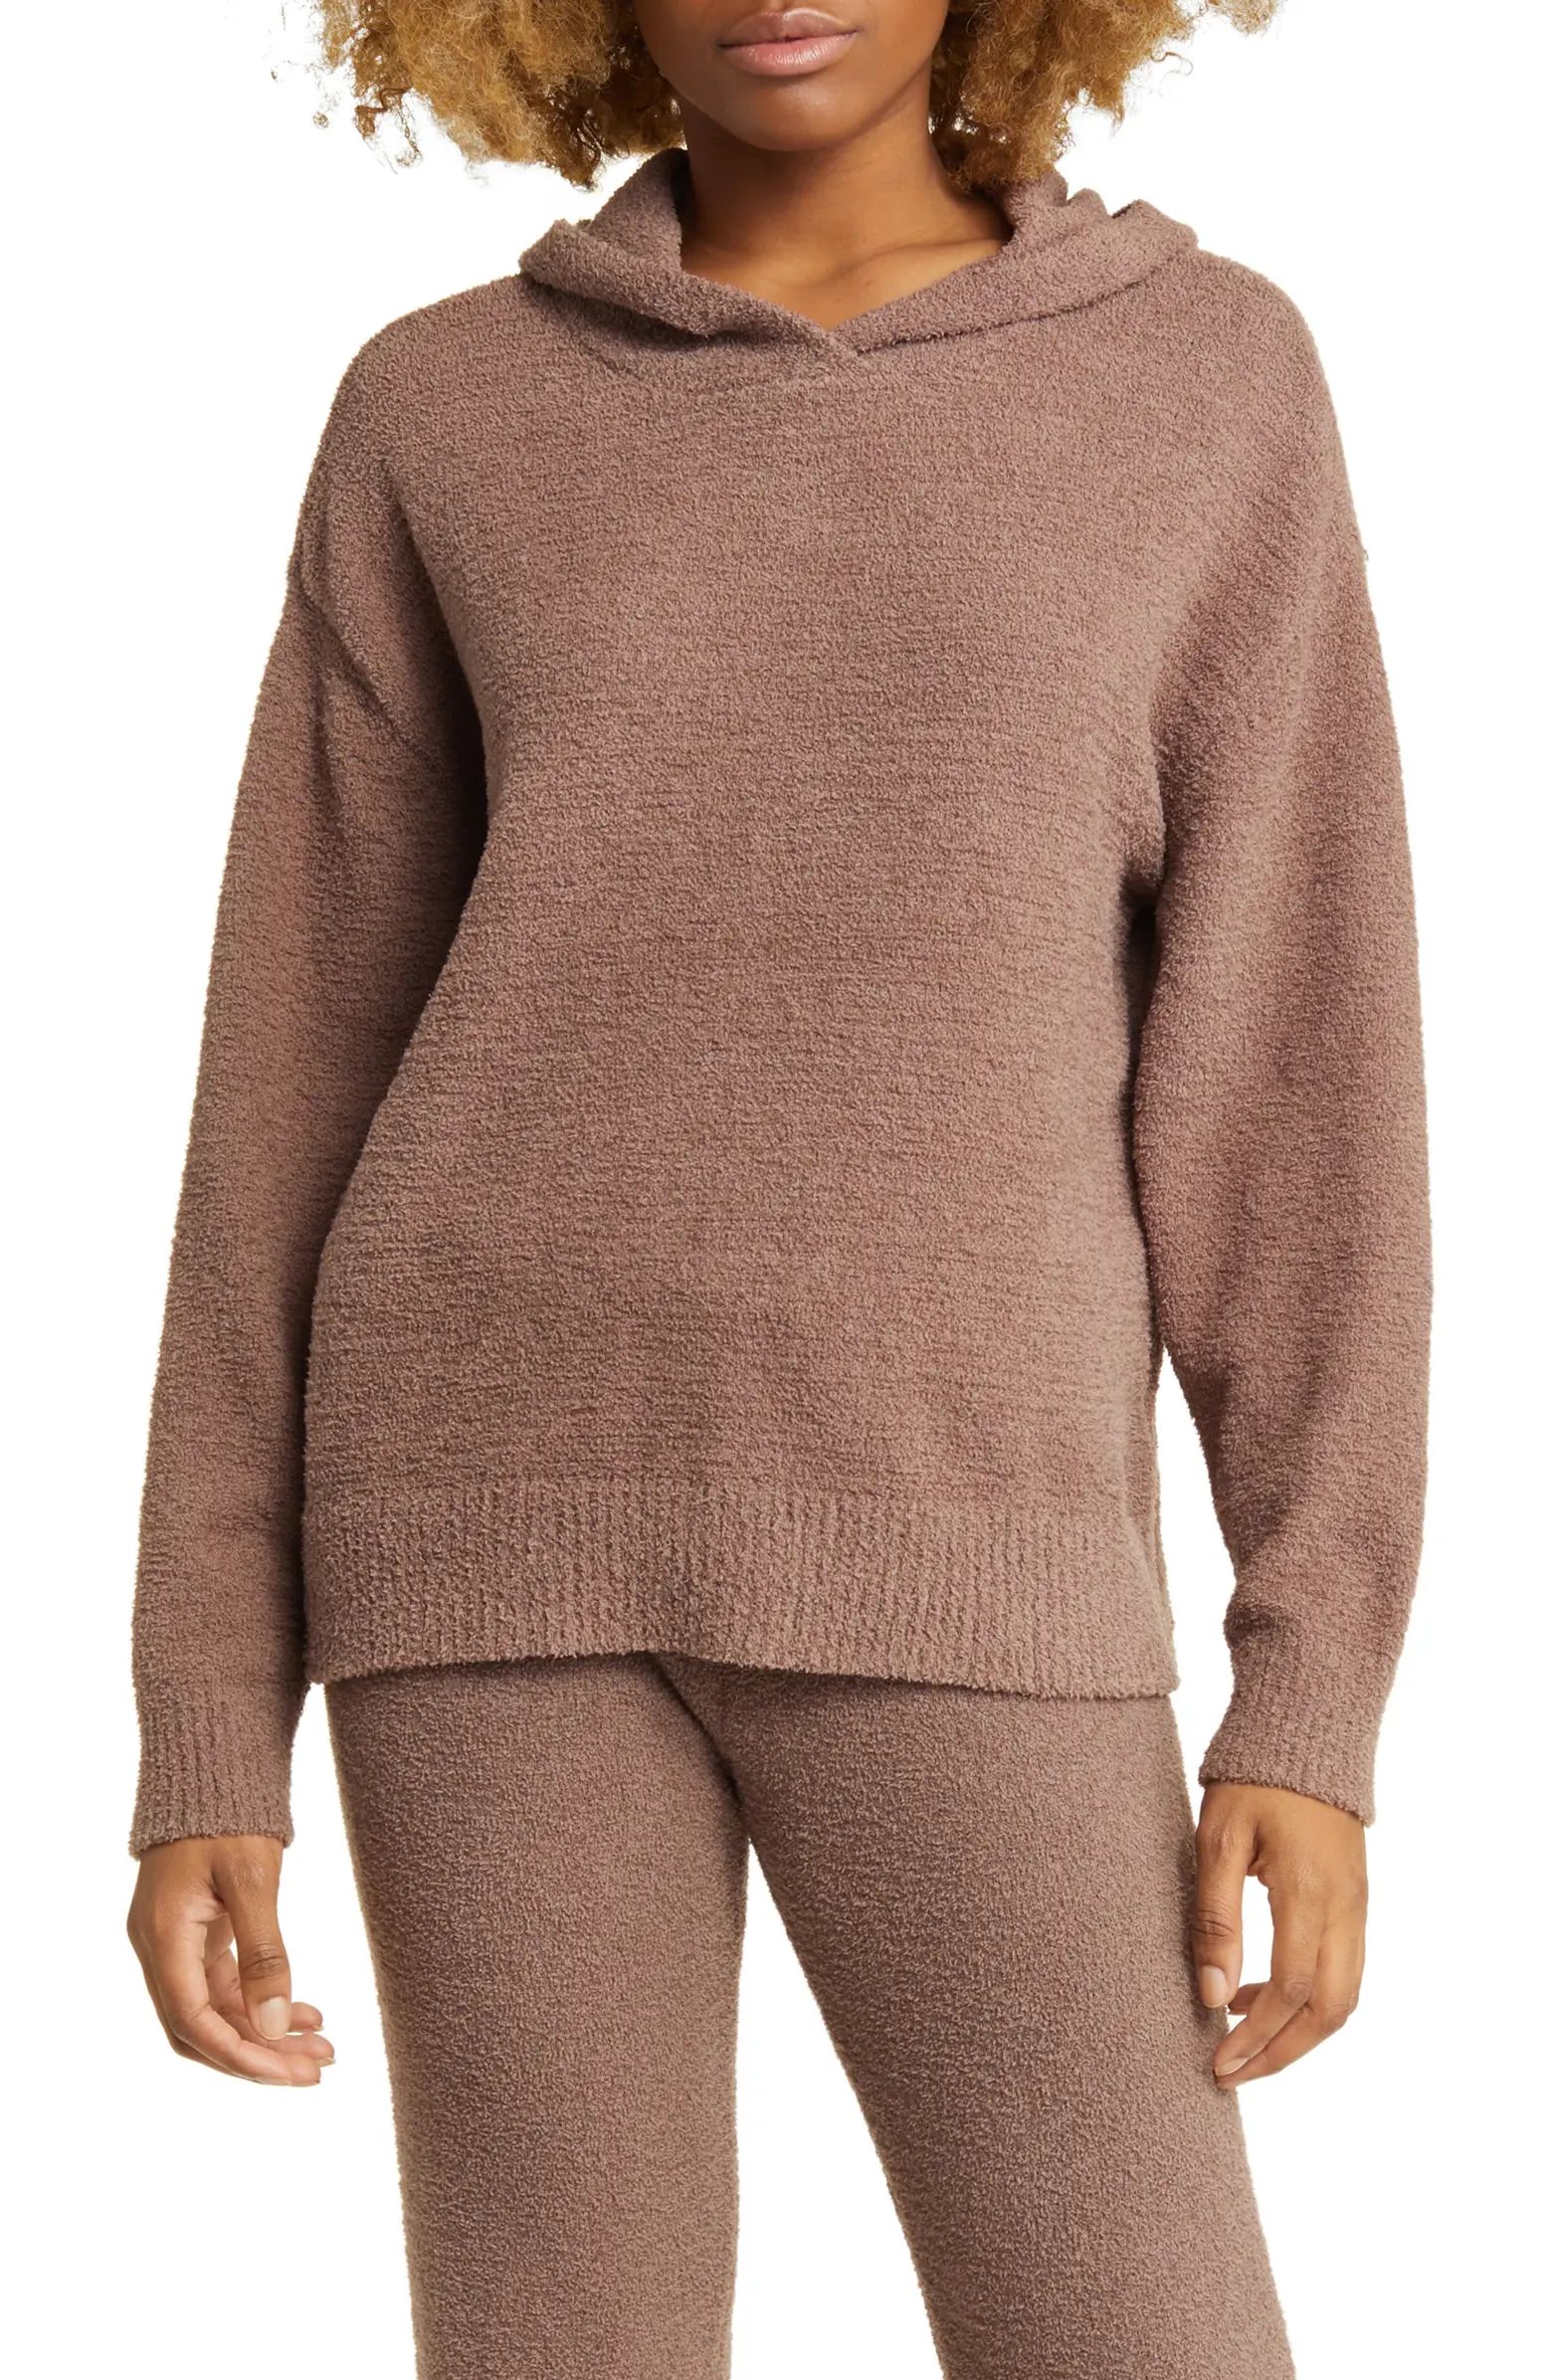 Made from supersoft fleece, this hoodie is playfully warm and perfect for lazy days at home. | Nordstrom